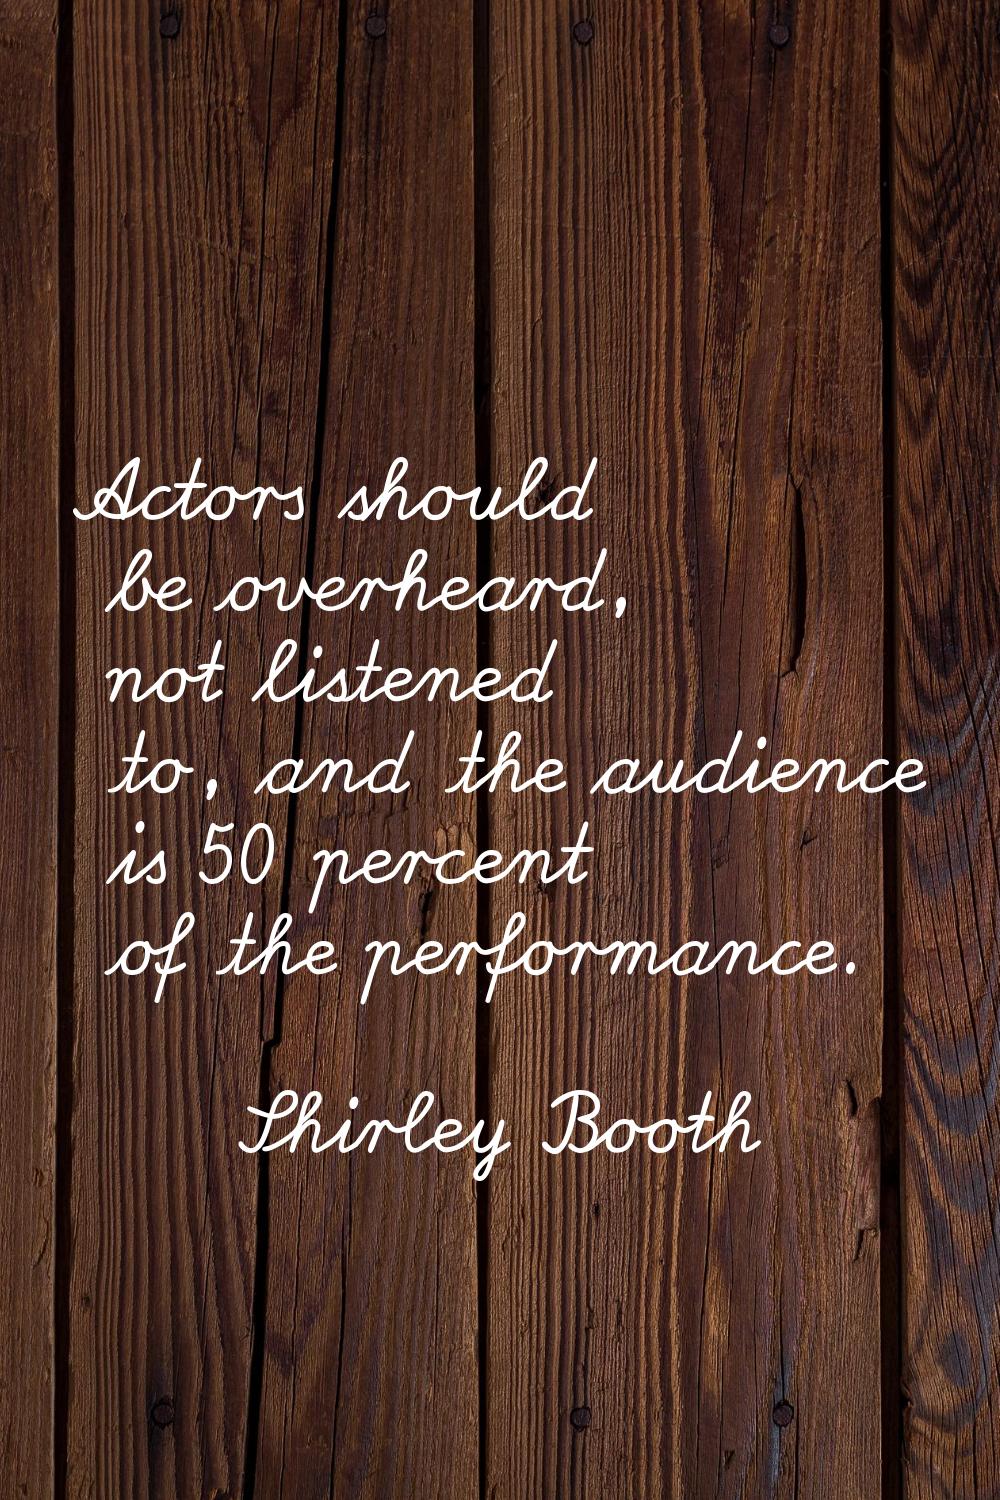 Actors should be overheard, not listened to, and the audience is 50 percent of the performance.